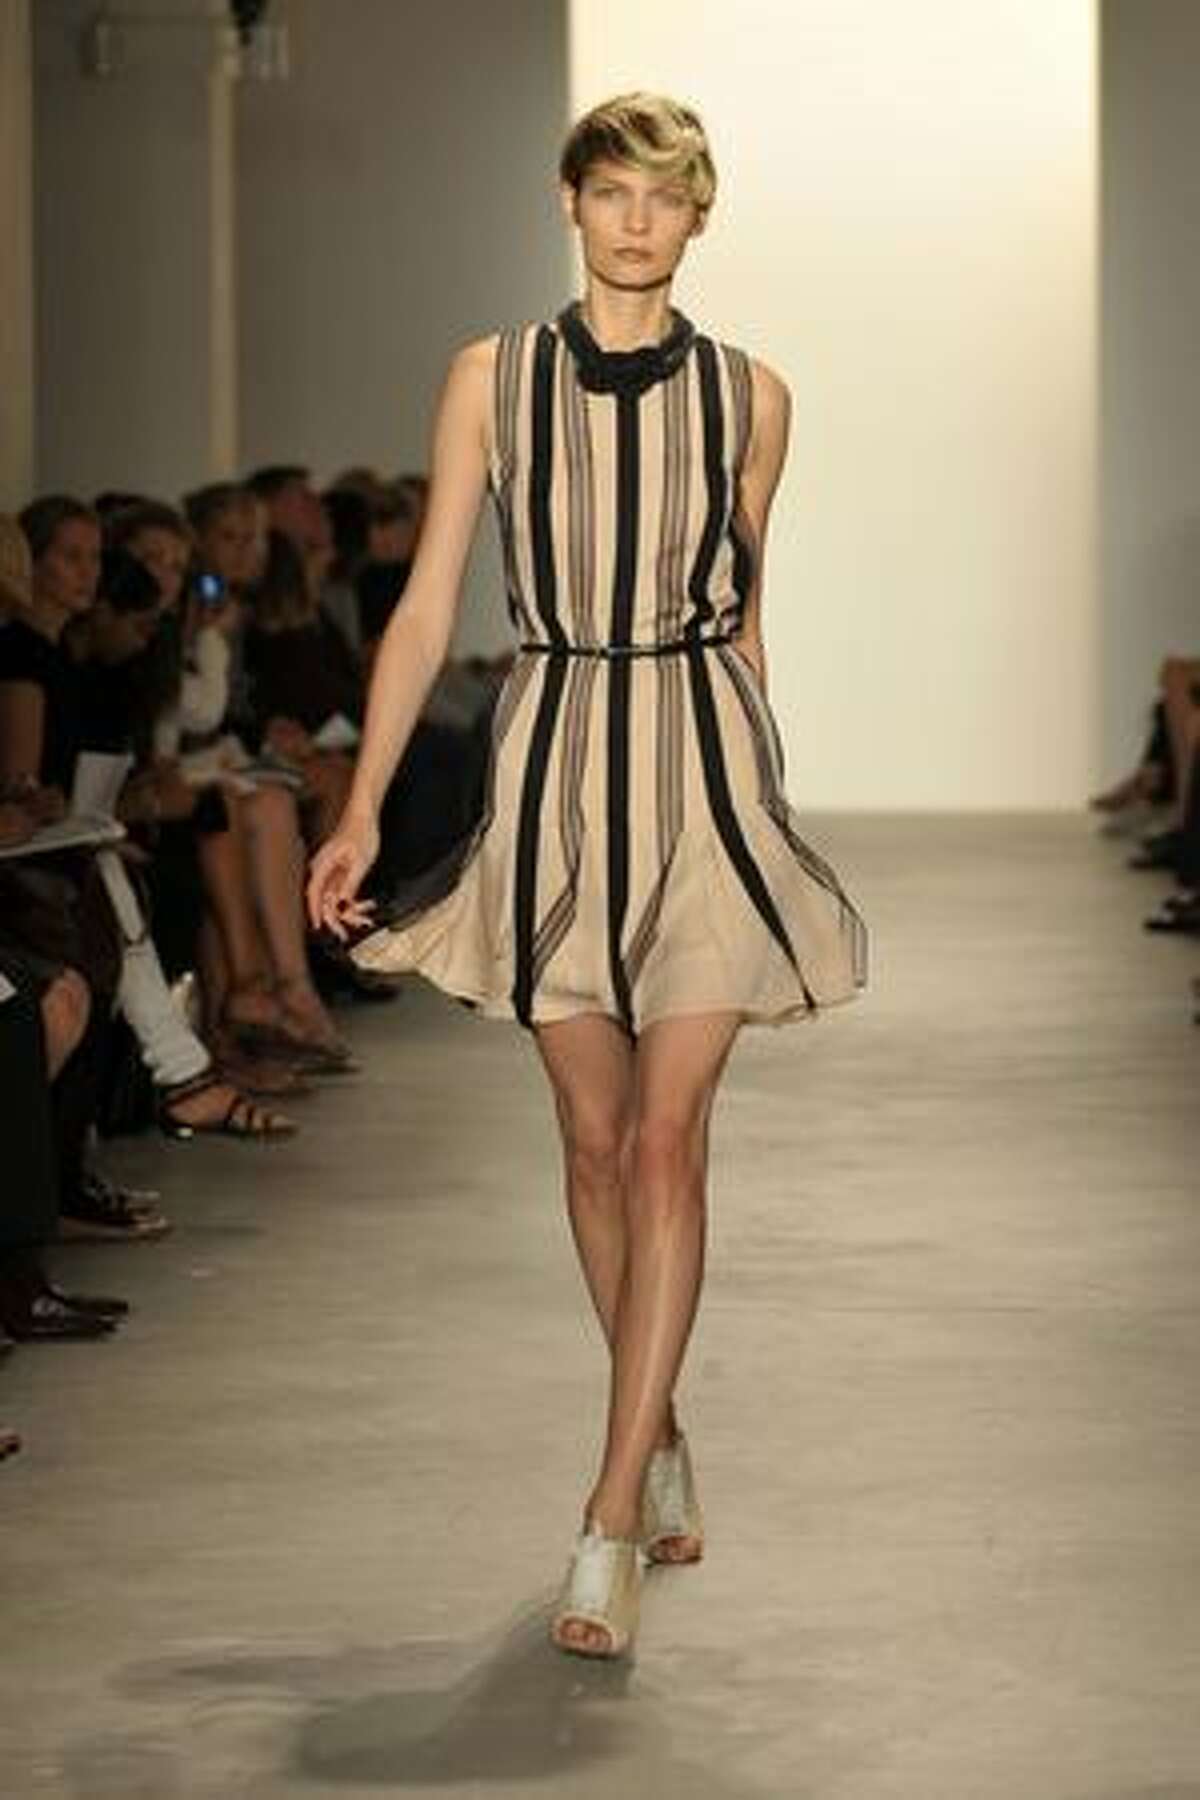 A model walks the runway at the Behnaz Sarafpour Spring 2010 Fashion Show at Milk Studio on Sunday in New York City.